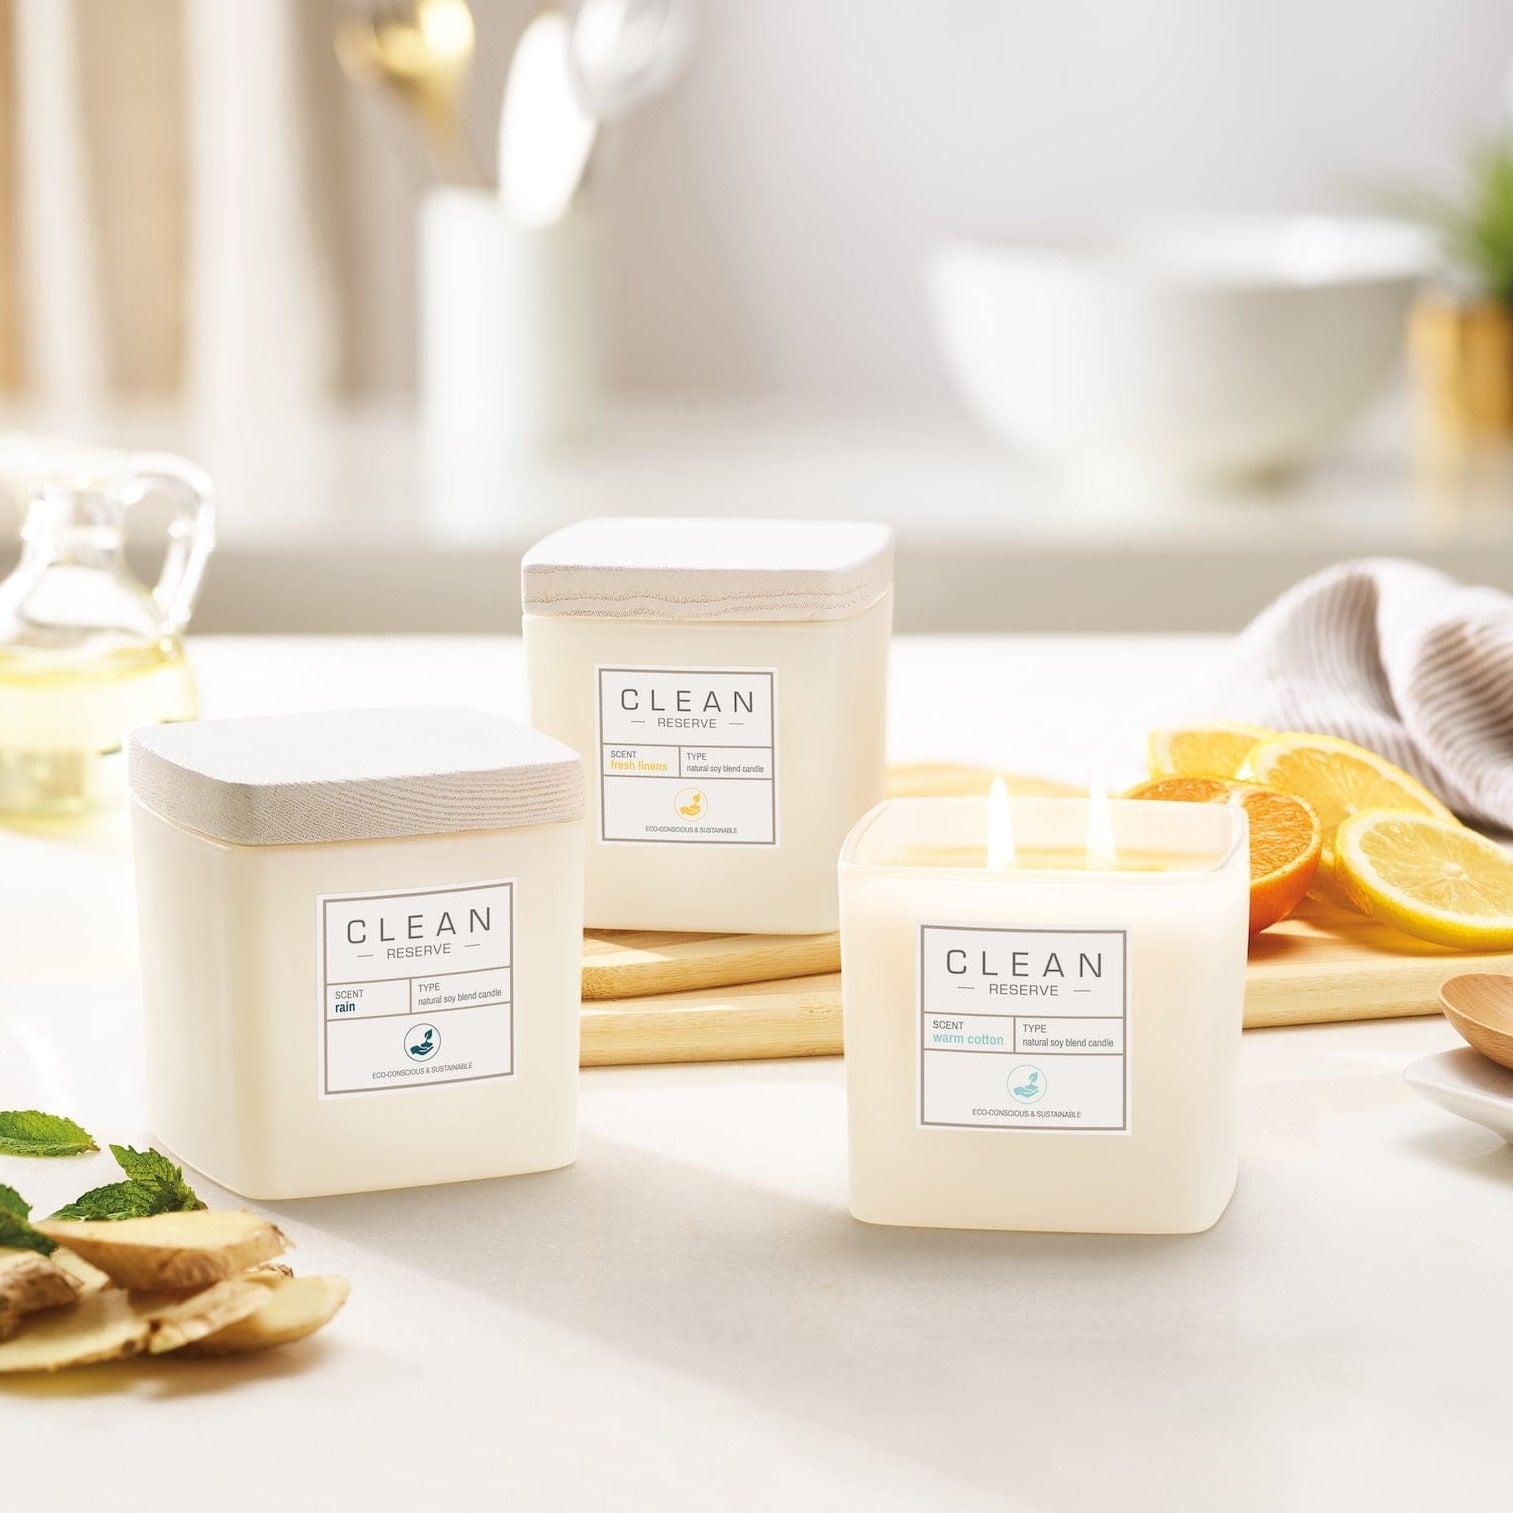 Clean Cotton Scent  Home Collection – Spa Candles & Scents